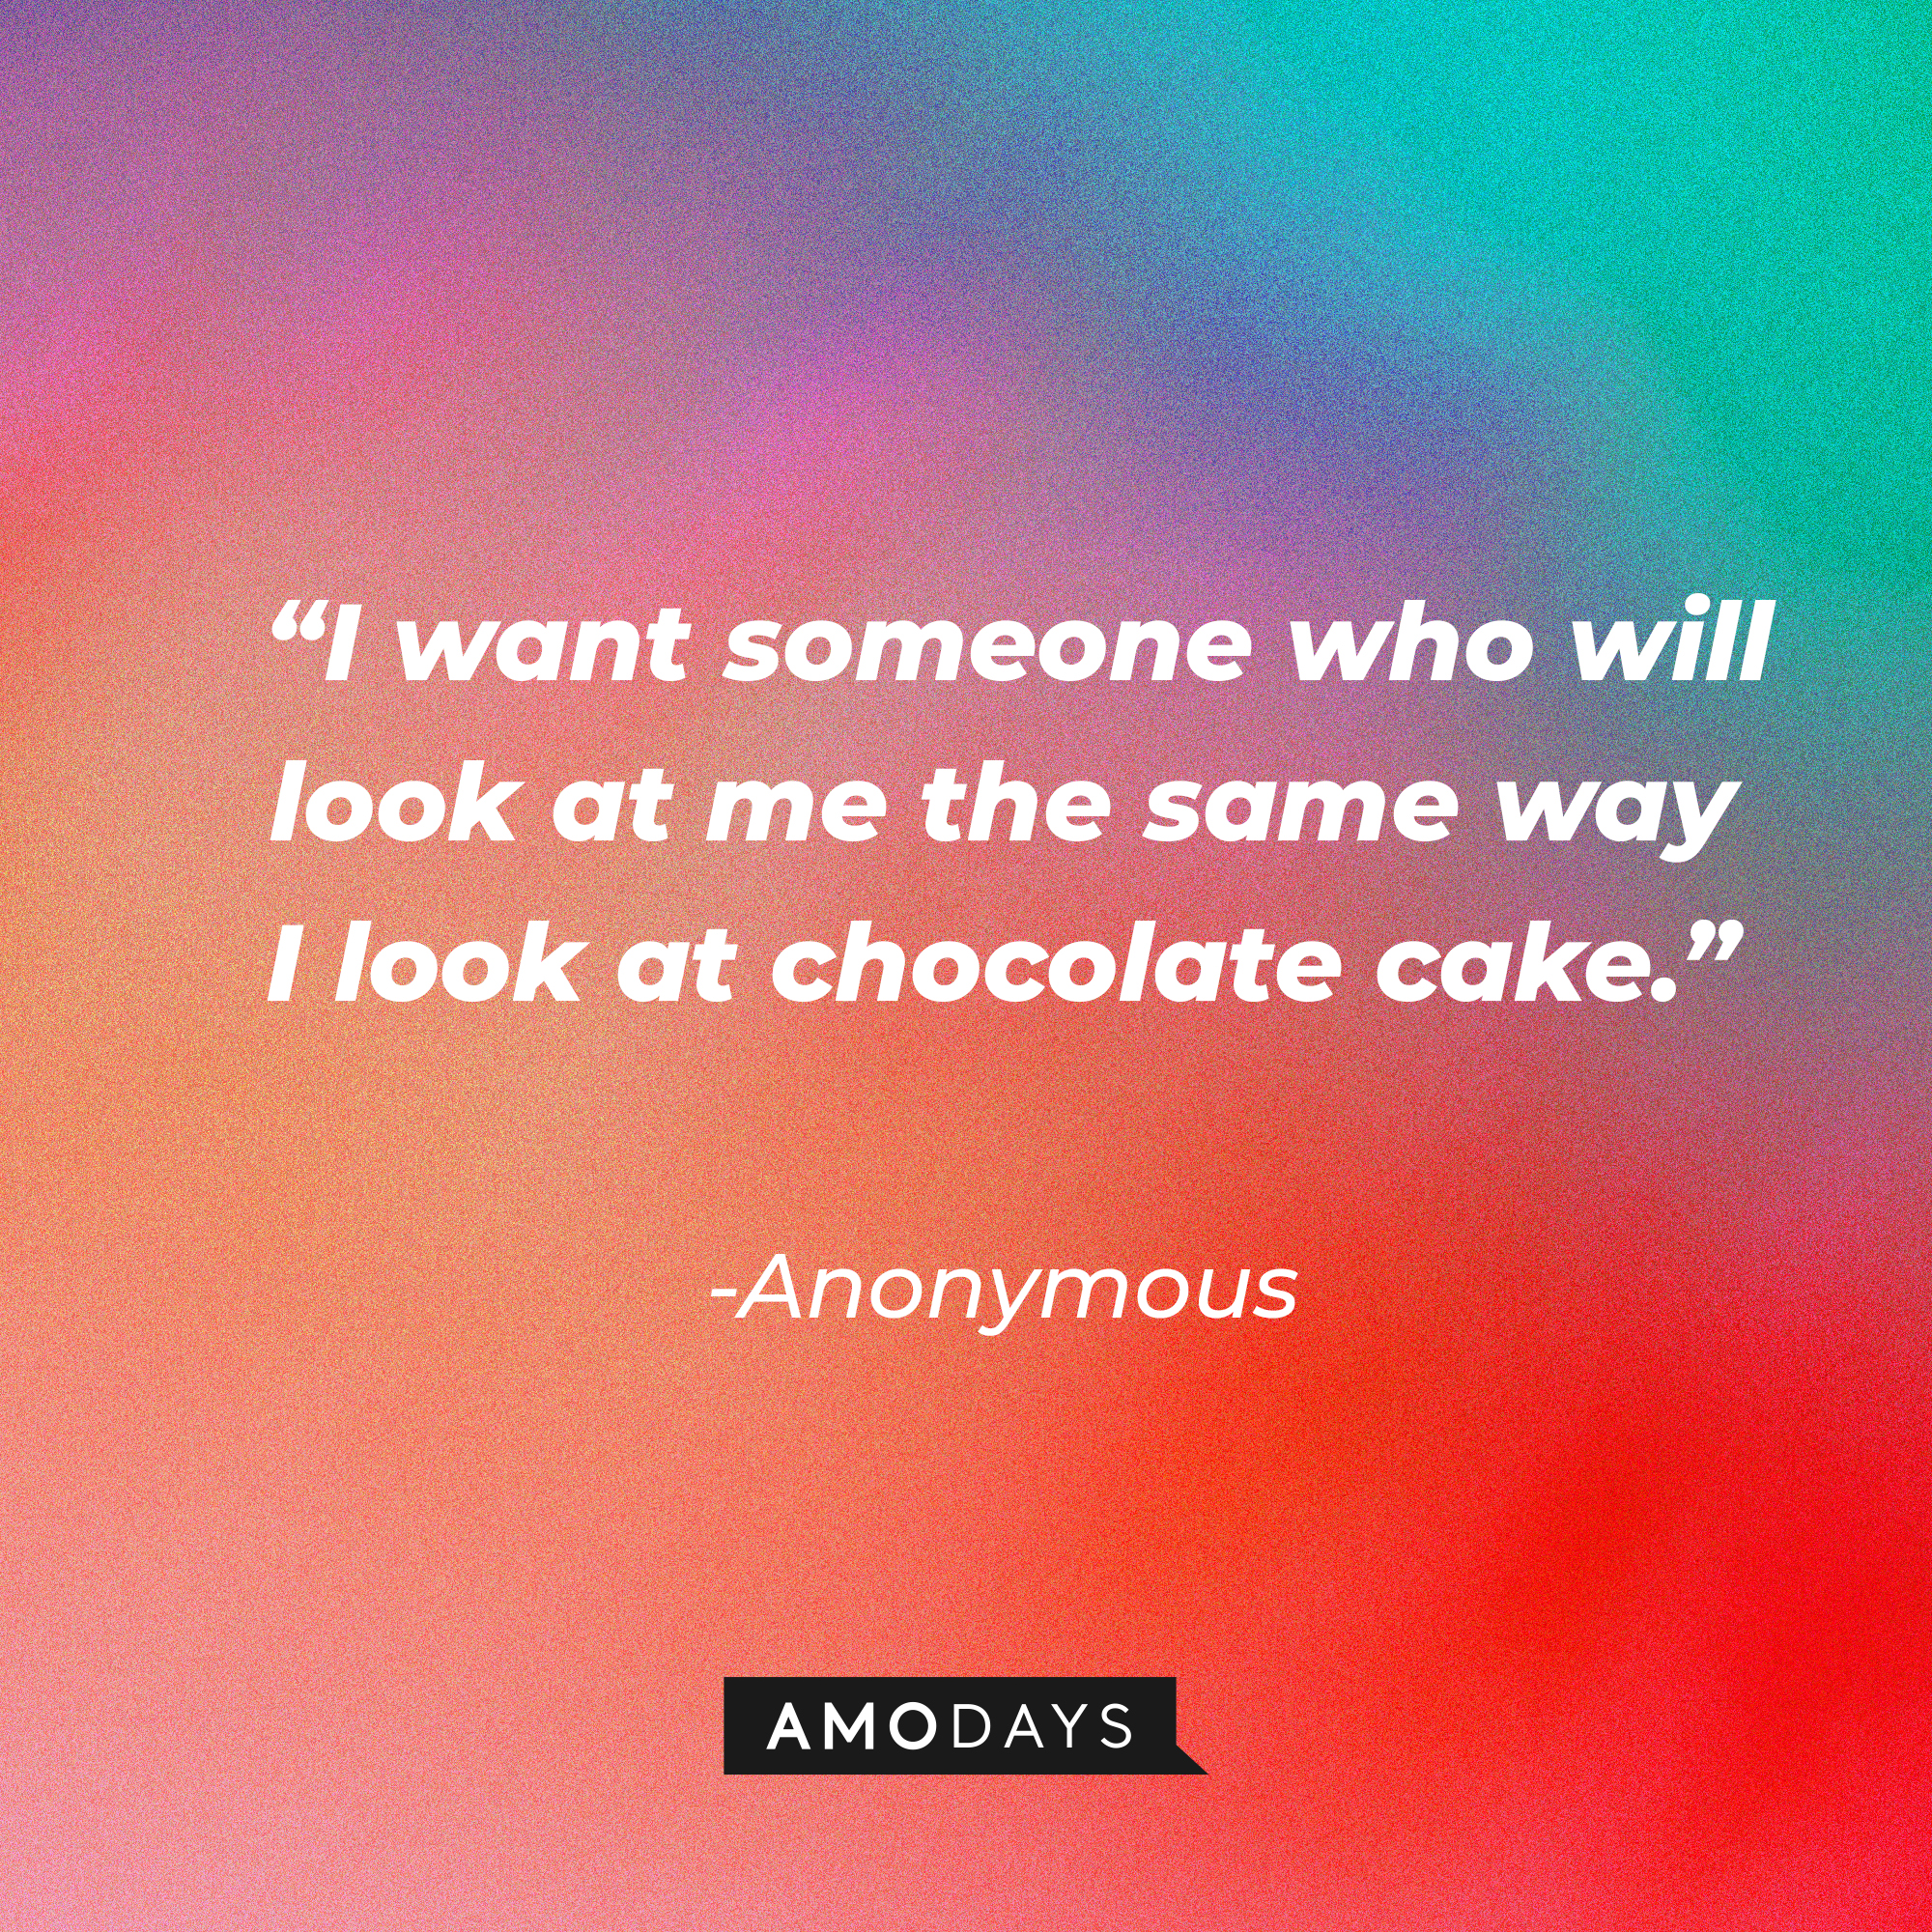 Anonymous quote: “I want someone who will look at me the same way I look at chocolate cake.” | Source: Amodays